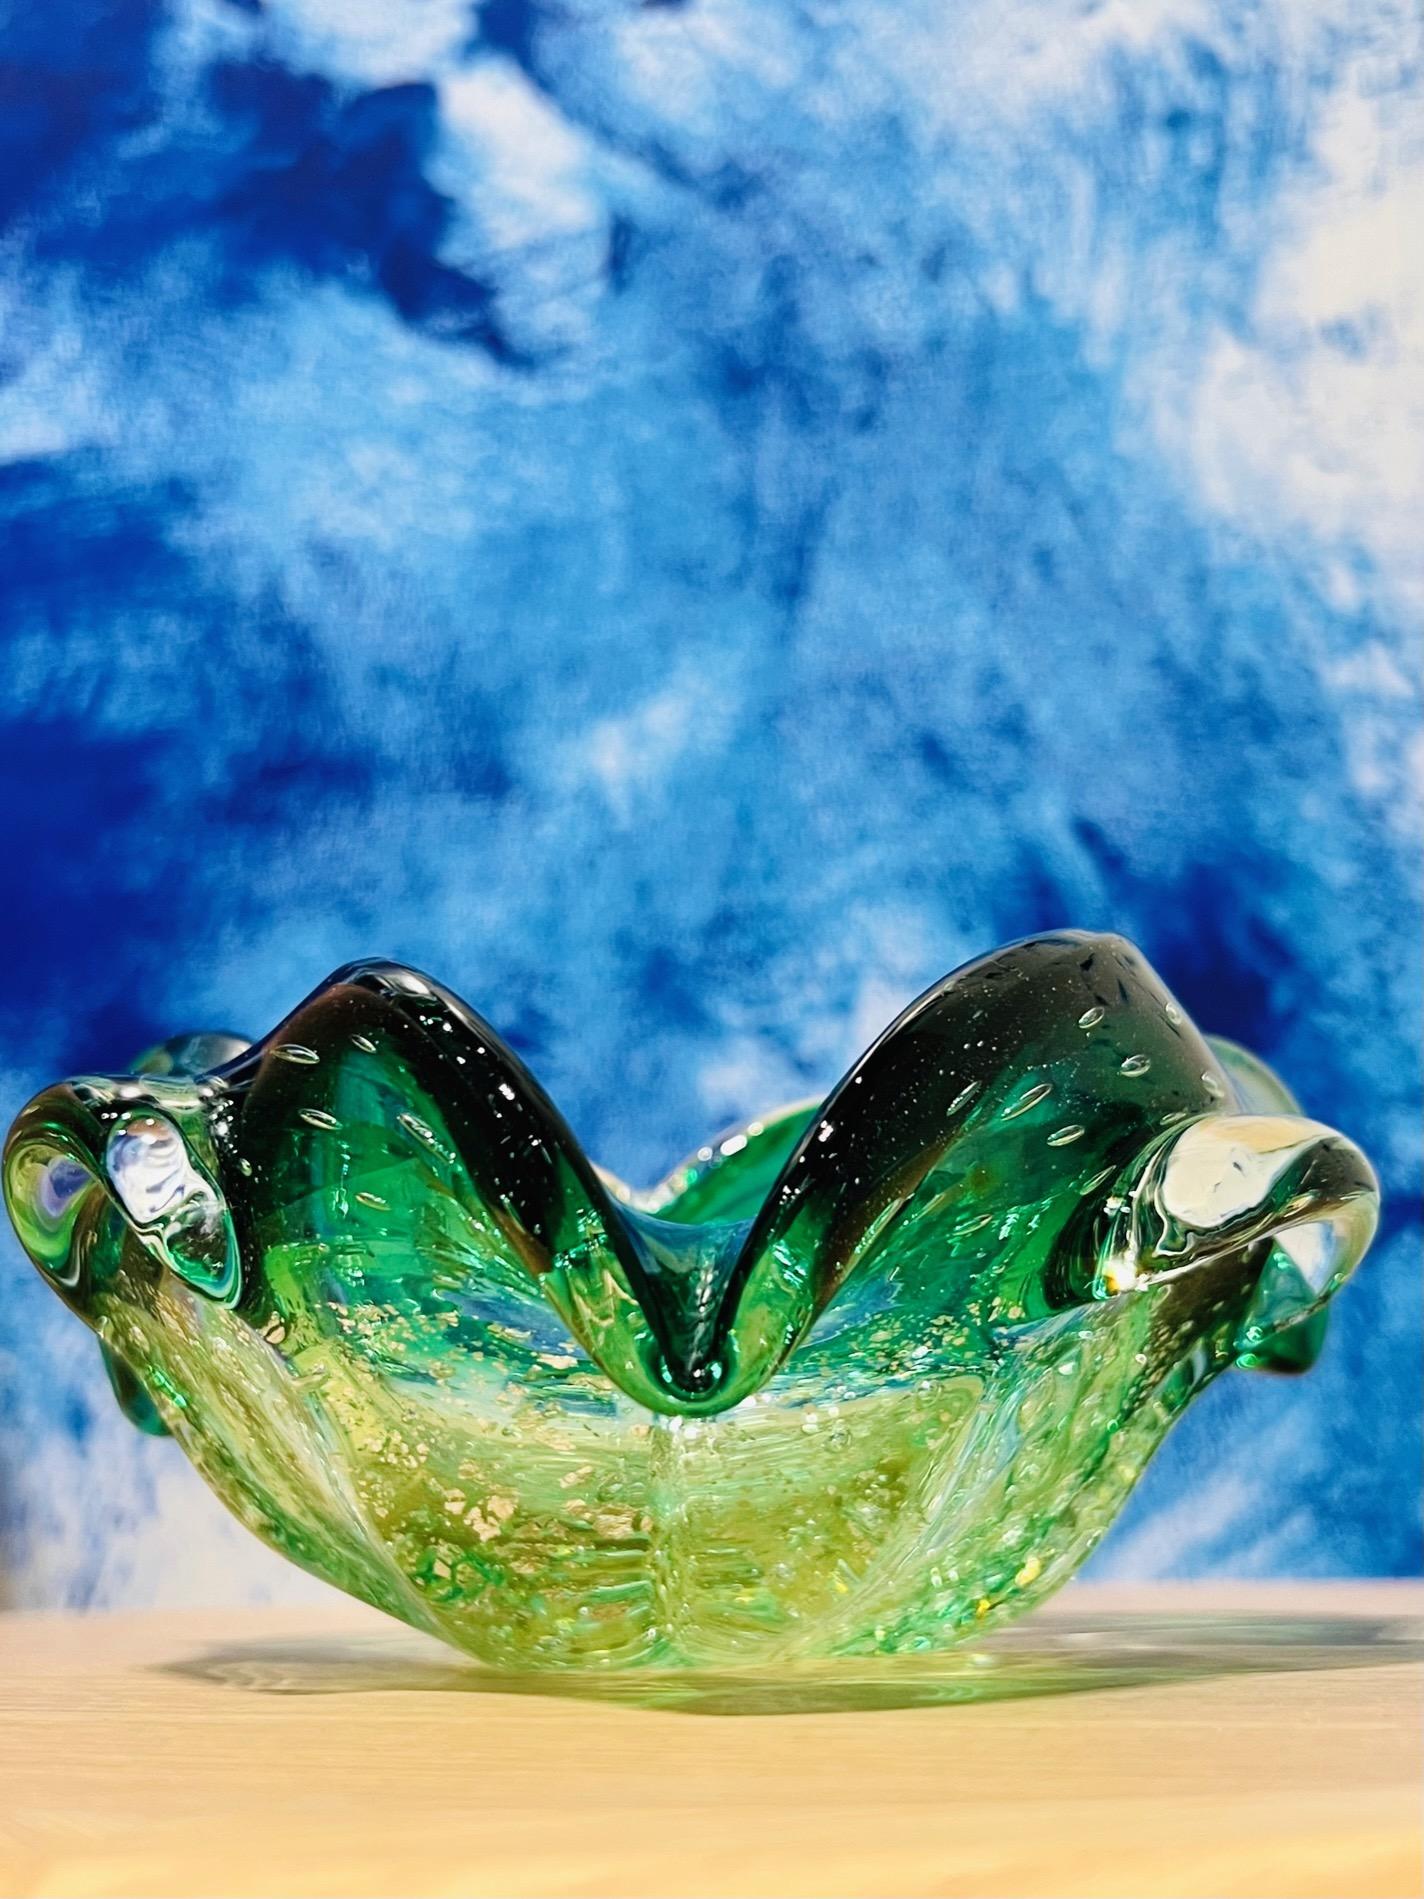 Hand-Crafted Emerald Green Murano Bowl or Ashtray with Gold Leaf Accents, Italy c. 1950s